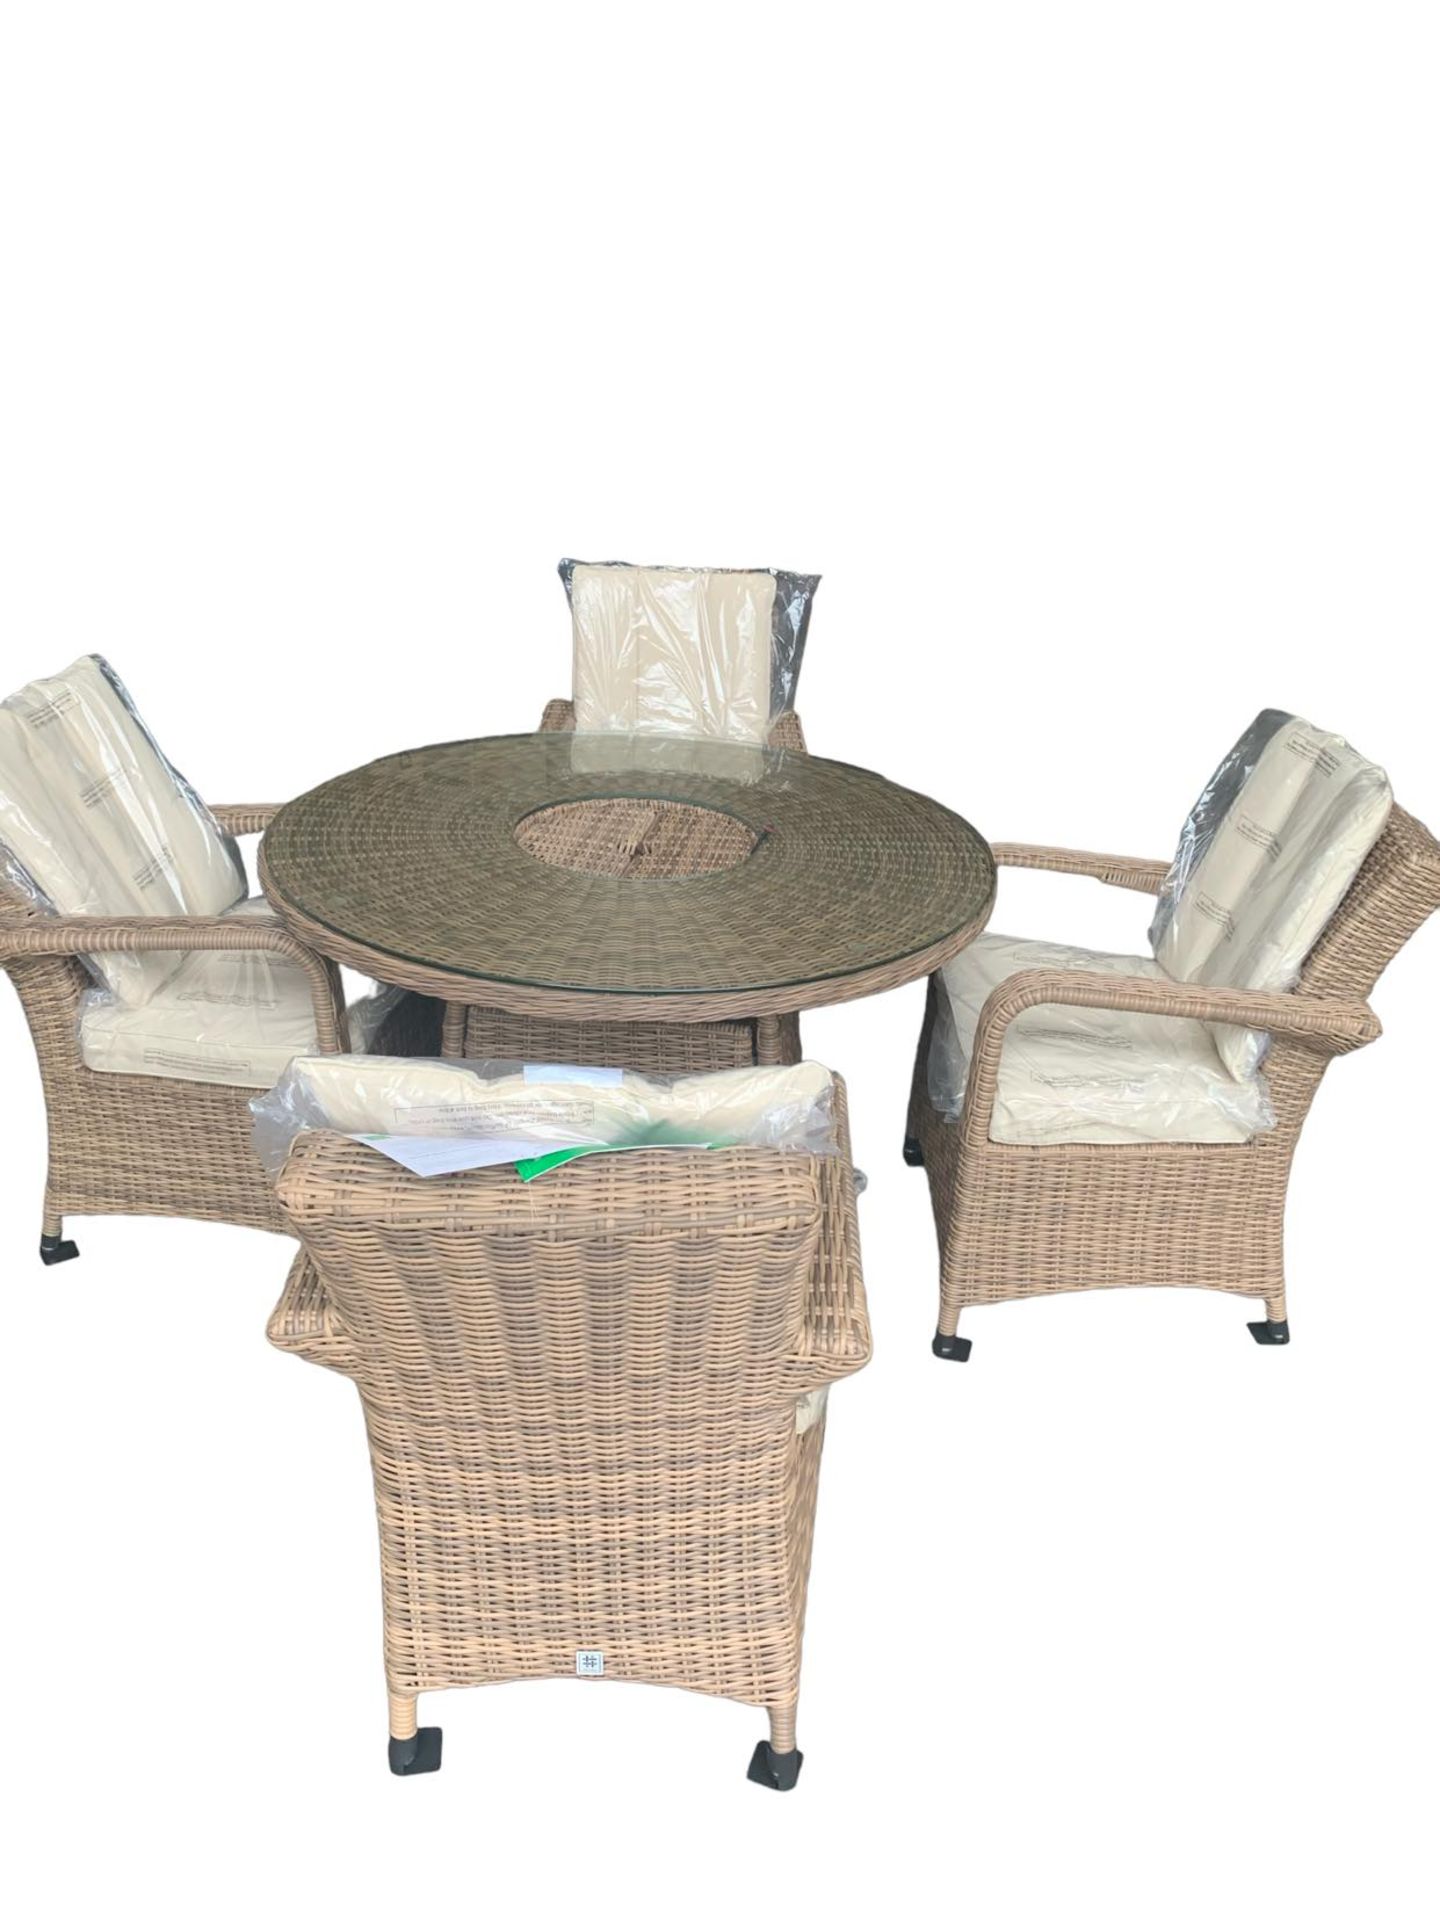 RATTAN SET 4 CHAIRS AND TABLE + ICEBUCKET+RAIN COVER - Image 2 of 5